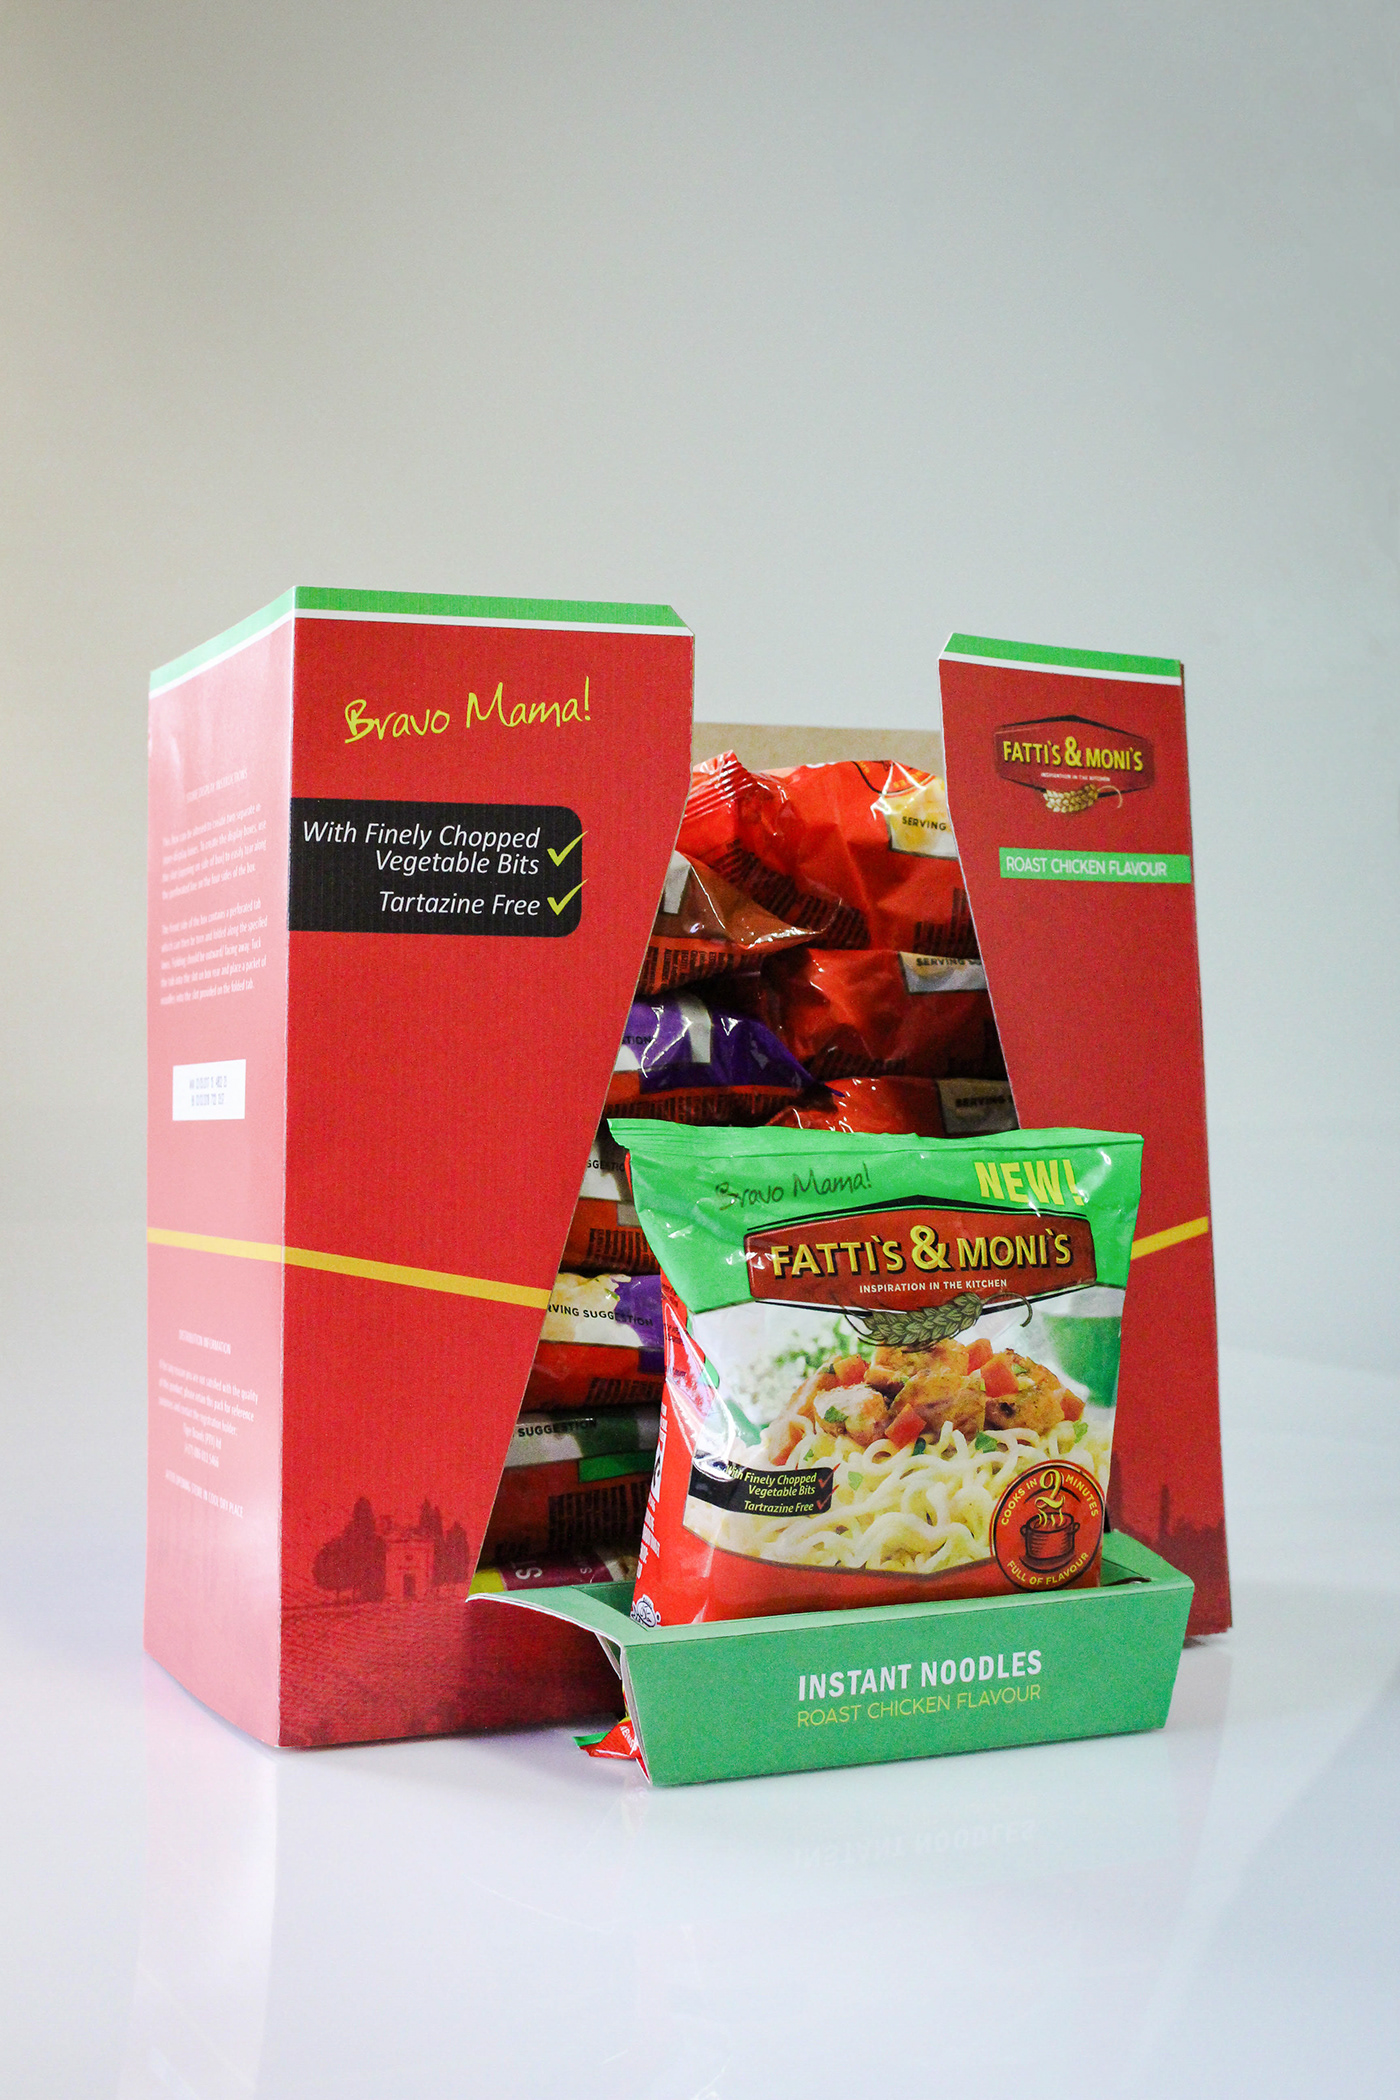 ipsa student gold pack Packaging branding  Retail Store Display graphic design  instant noodles distribution brand recognition